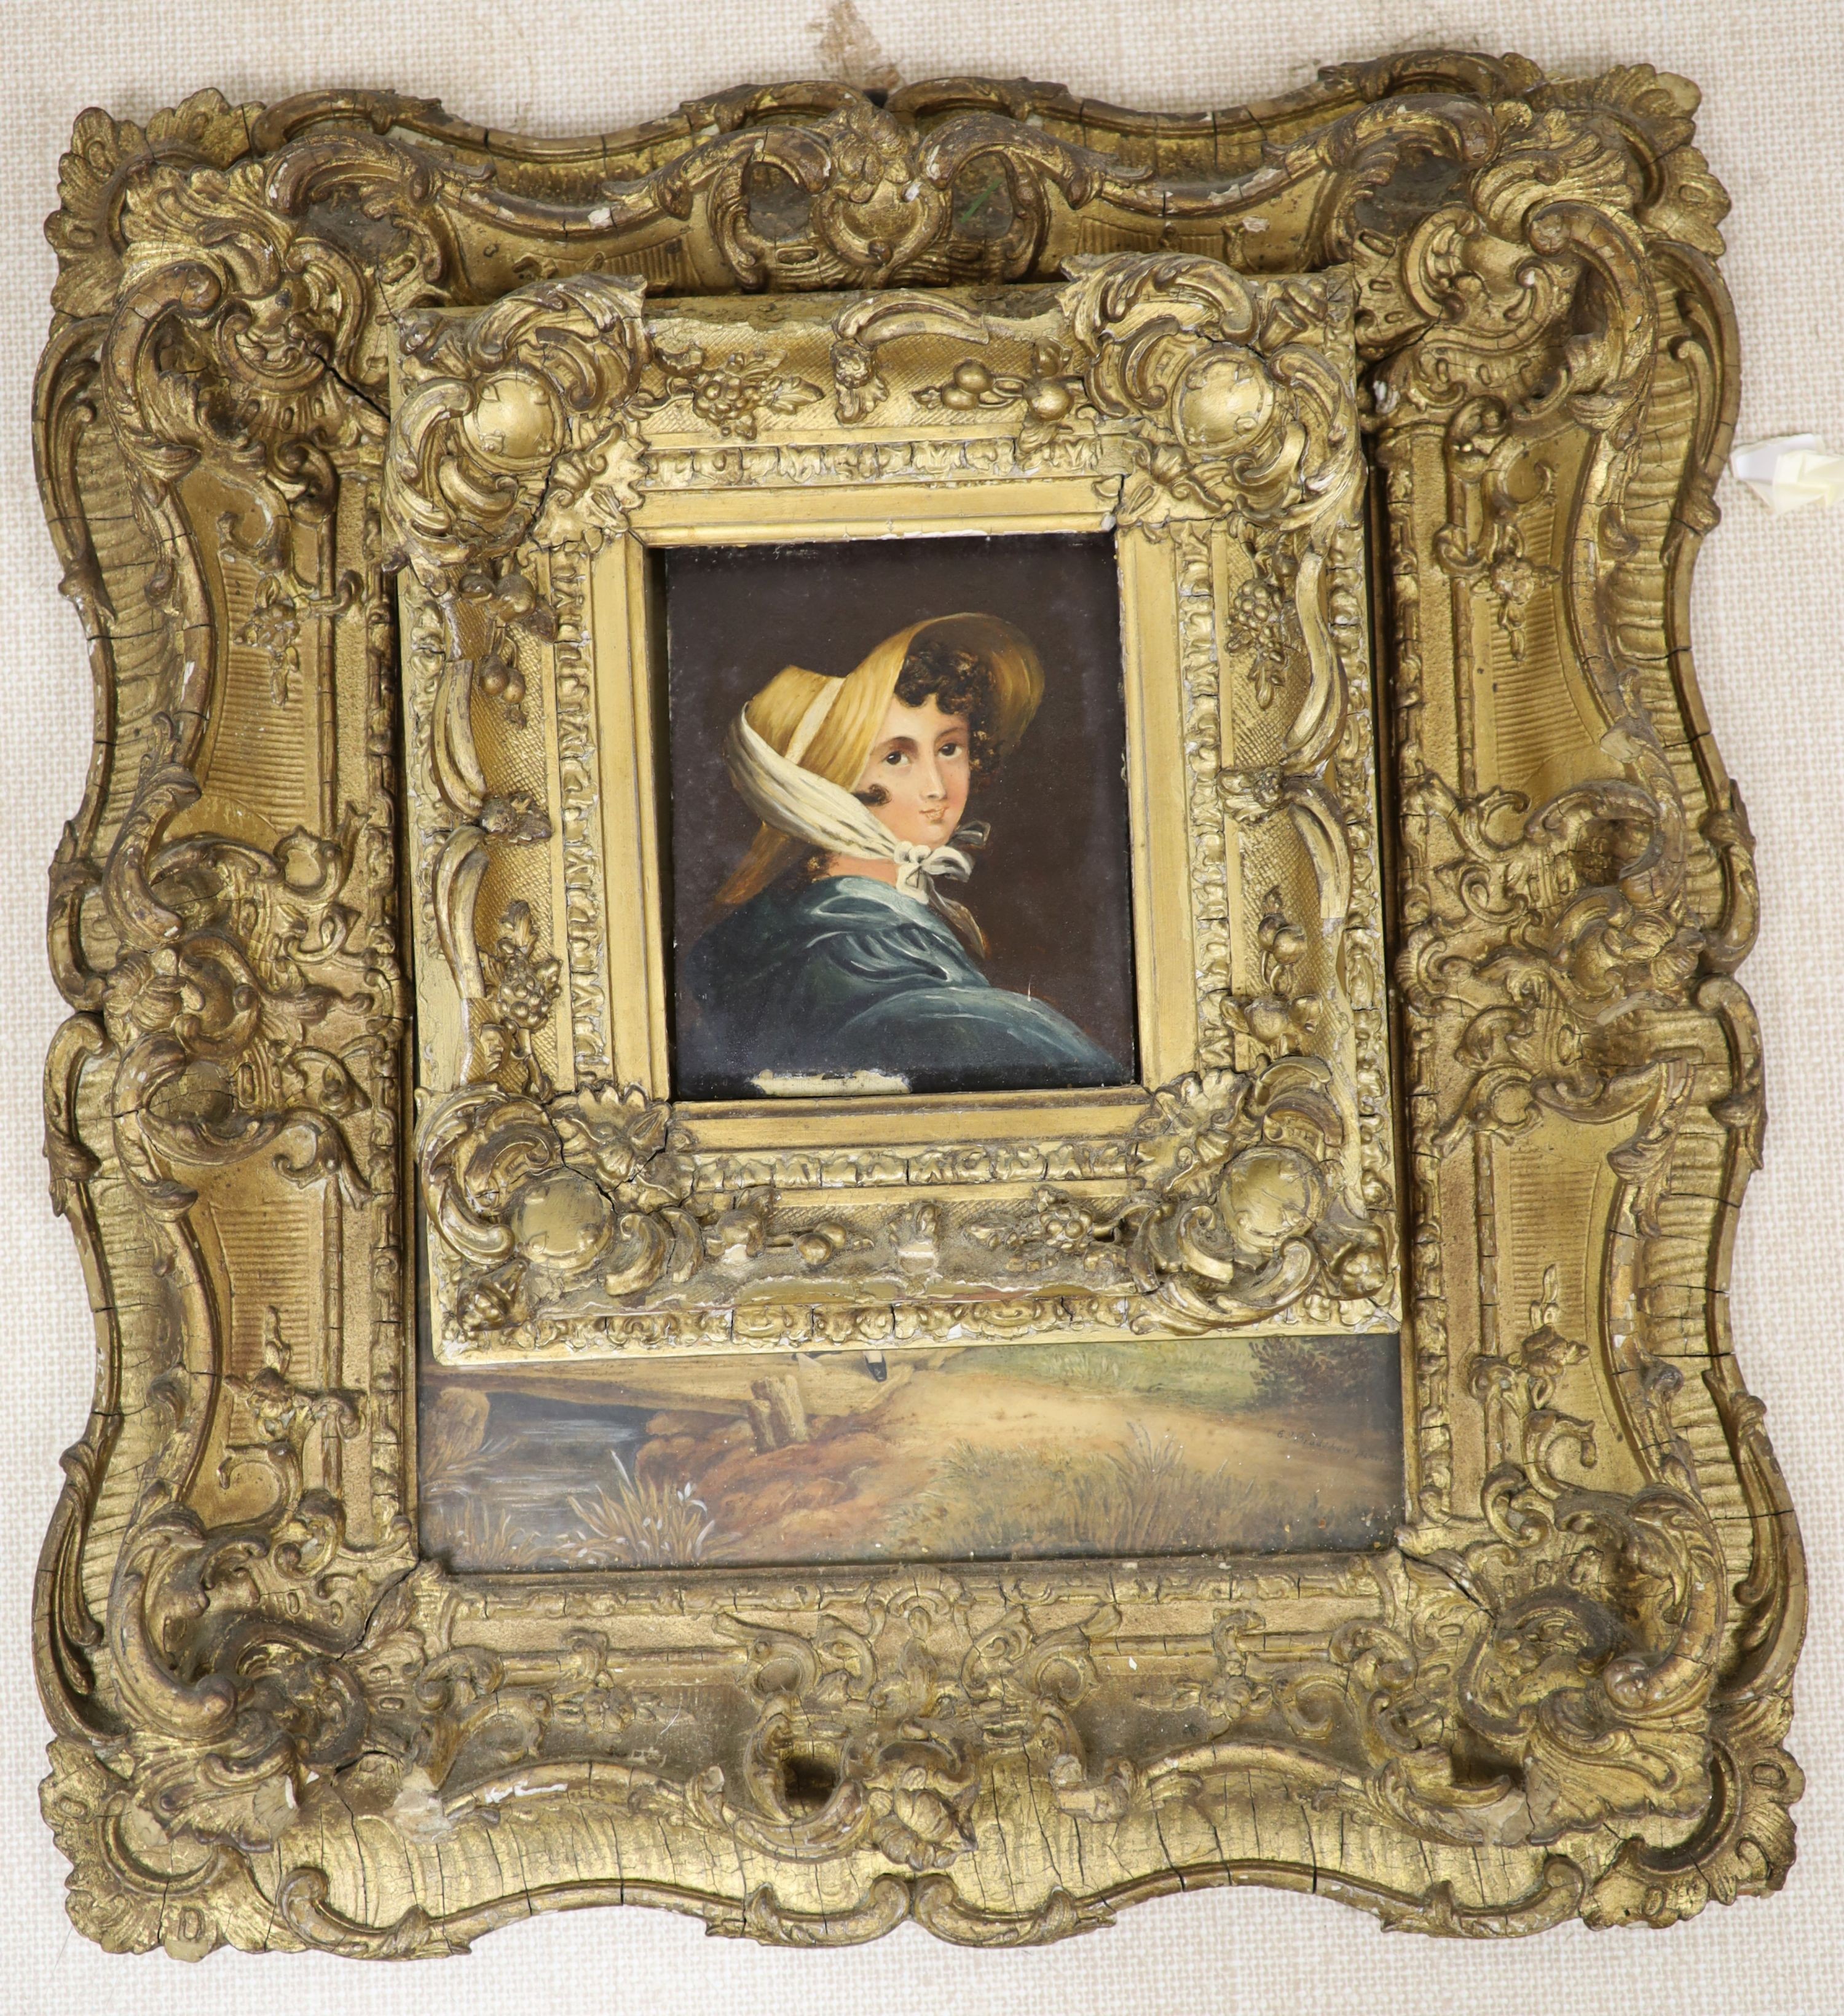 19th century English School, oil on wooden panel, Portrait of a young woman wearing a bonnet, 17 x 14cm, and one other picture of a girl by a bridge